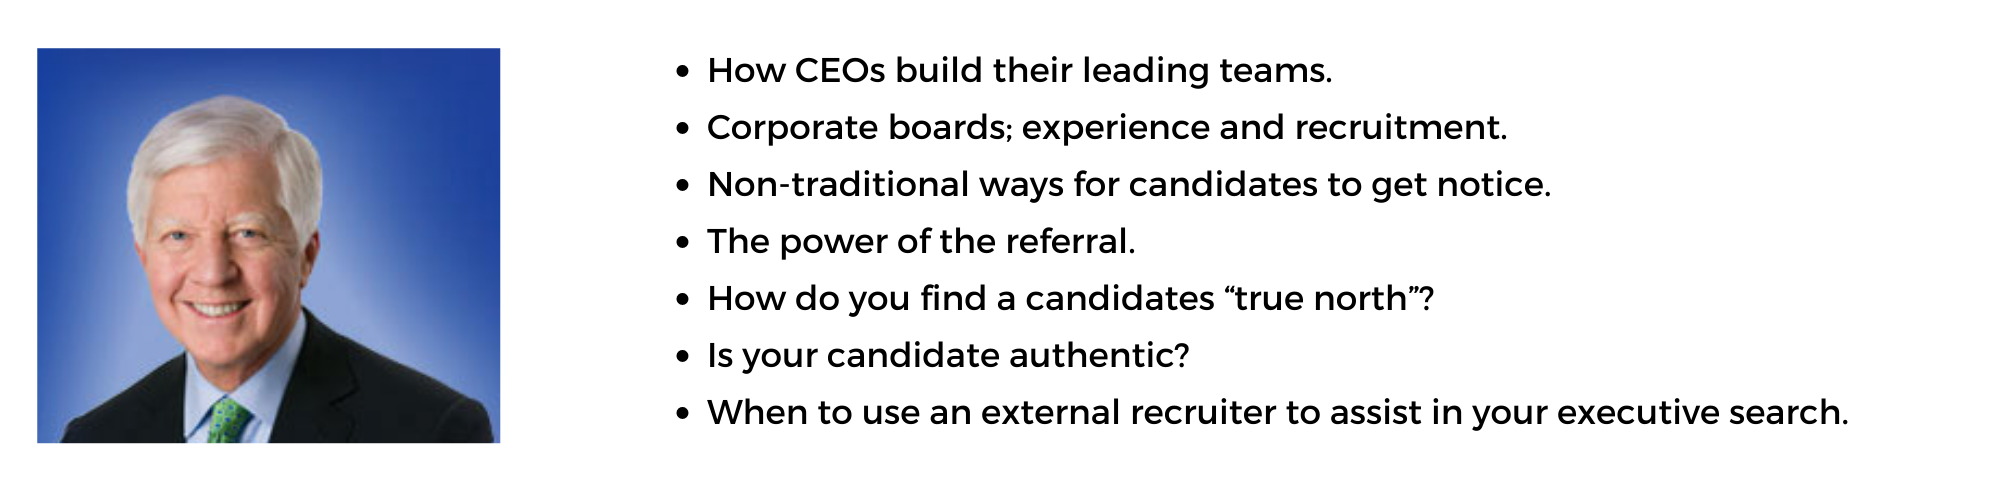 Bill George | Hiring Executives and Authentic Leadership: From a CEO and Board Perspective